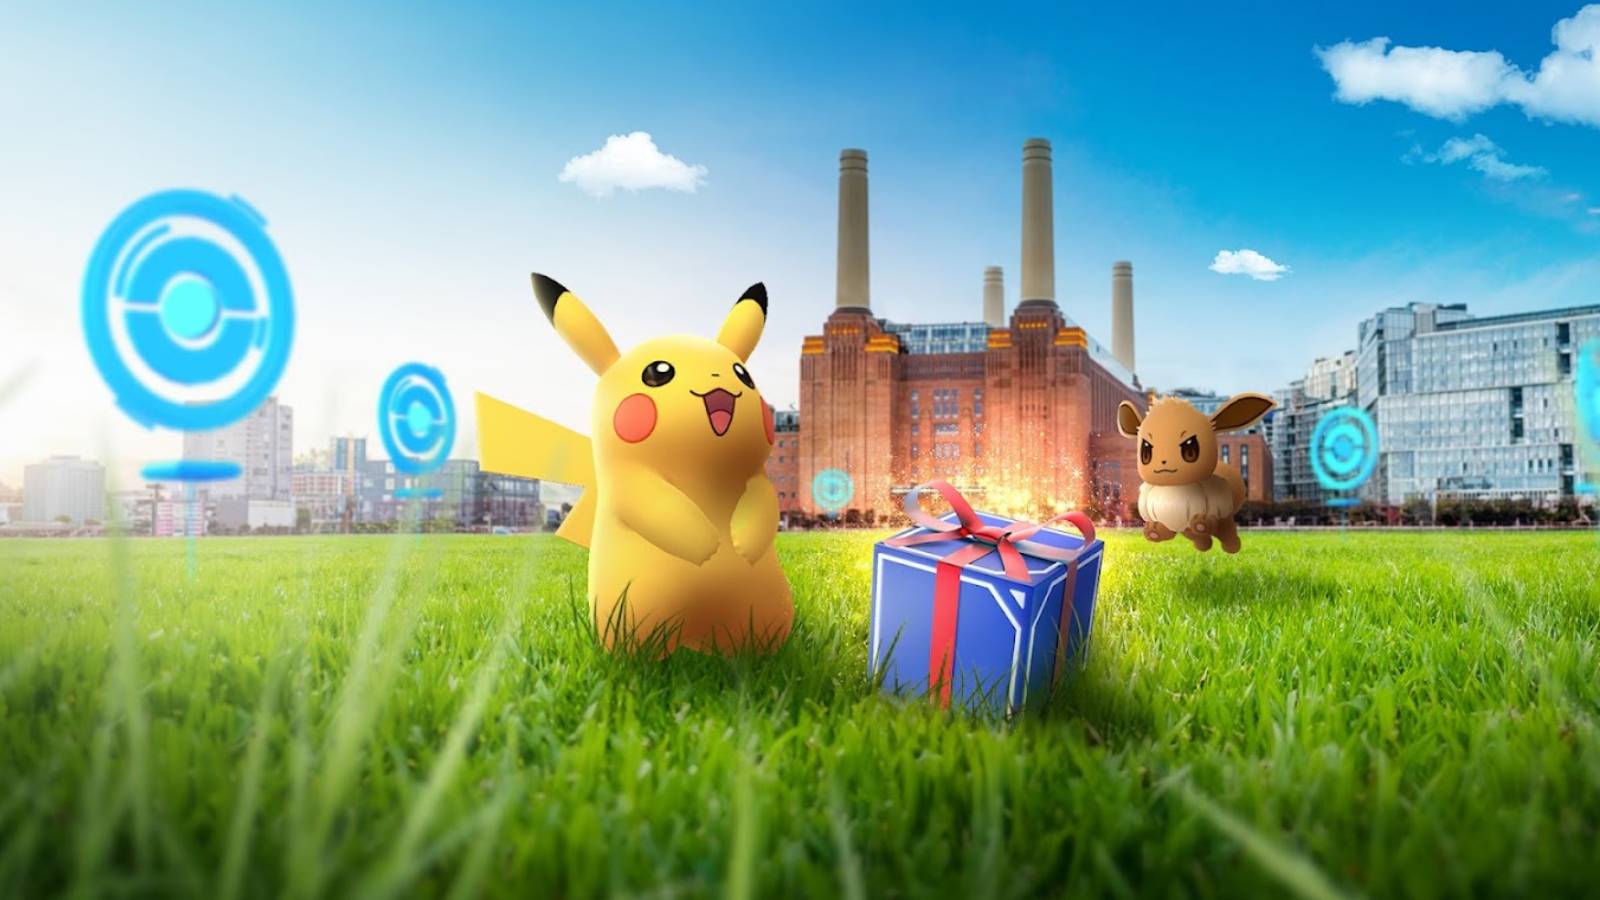 Pikachu and Eevee stand in a field in London